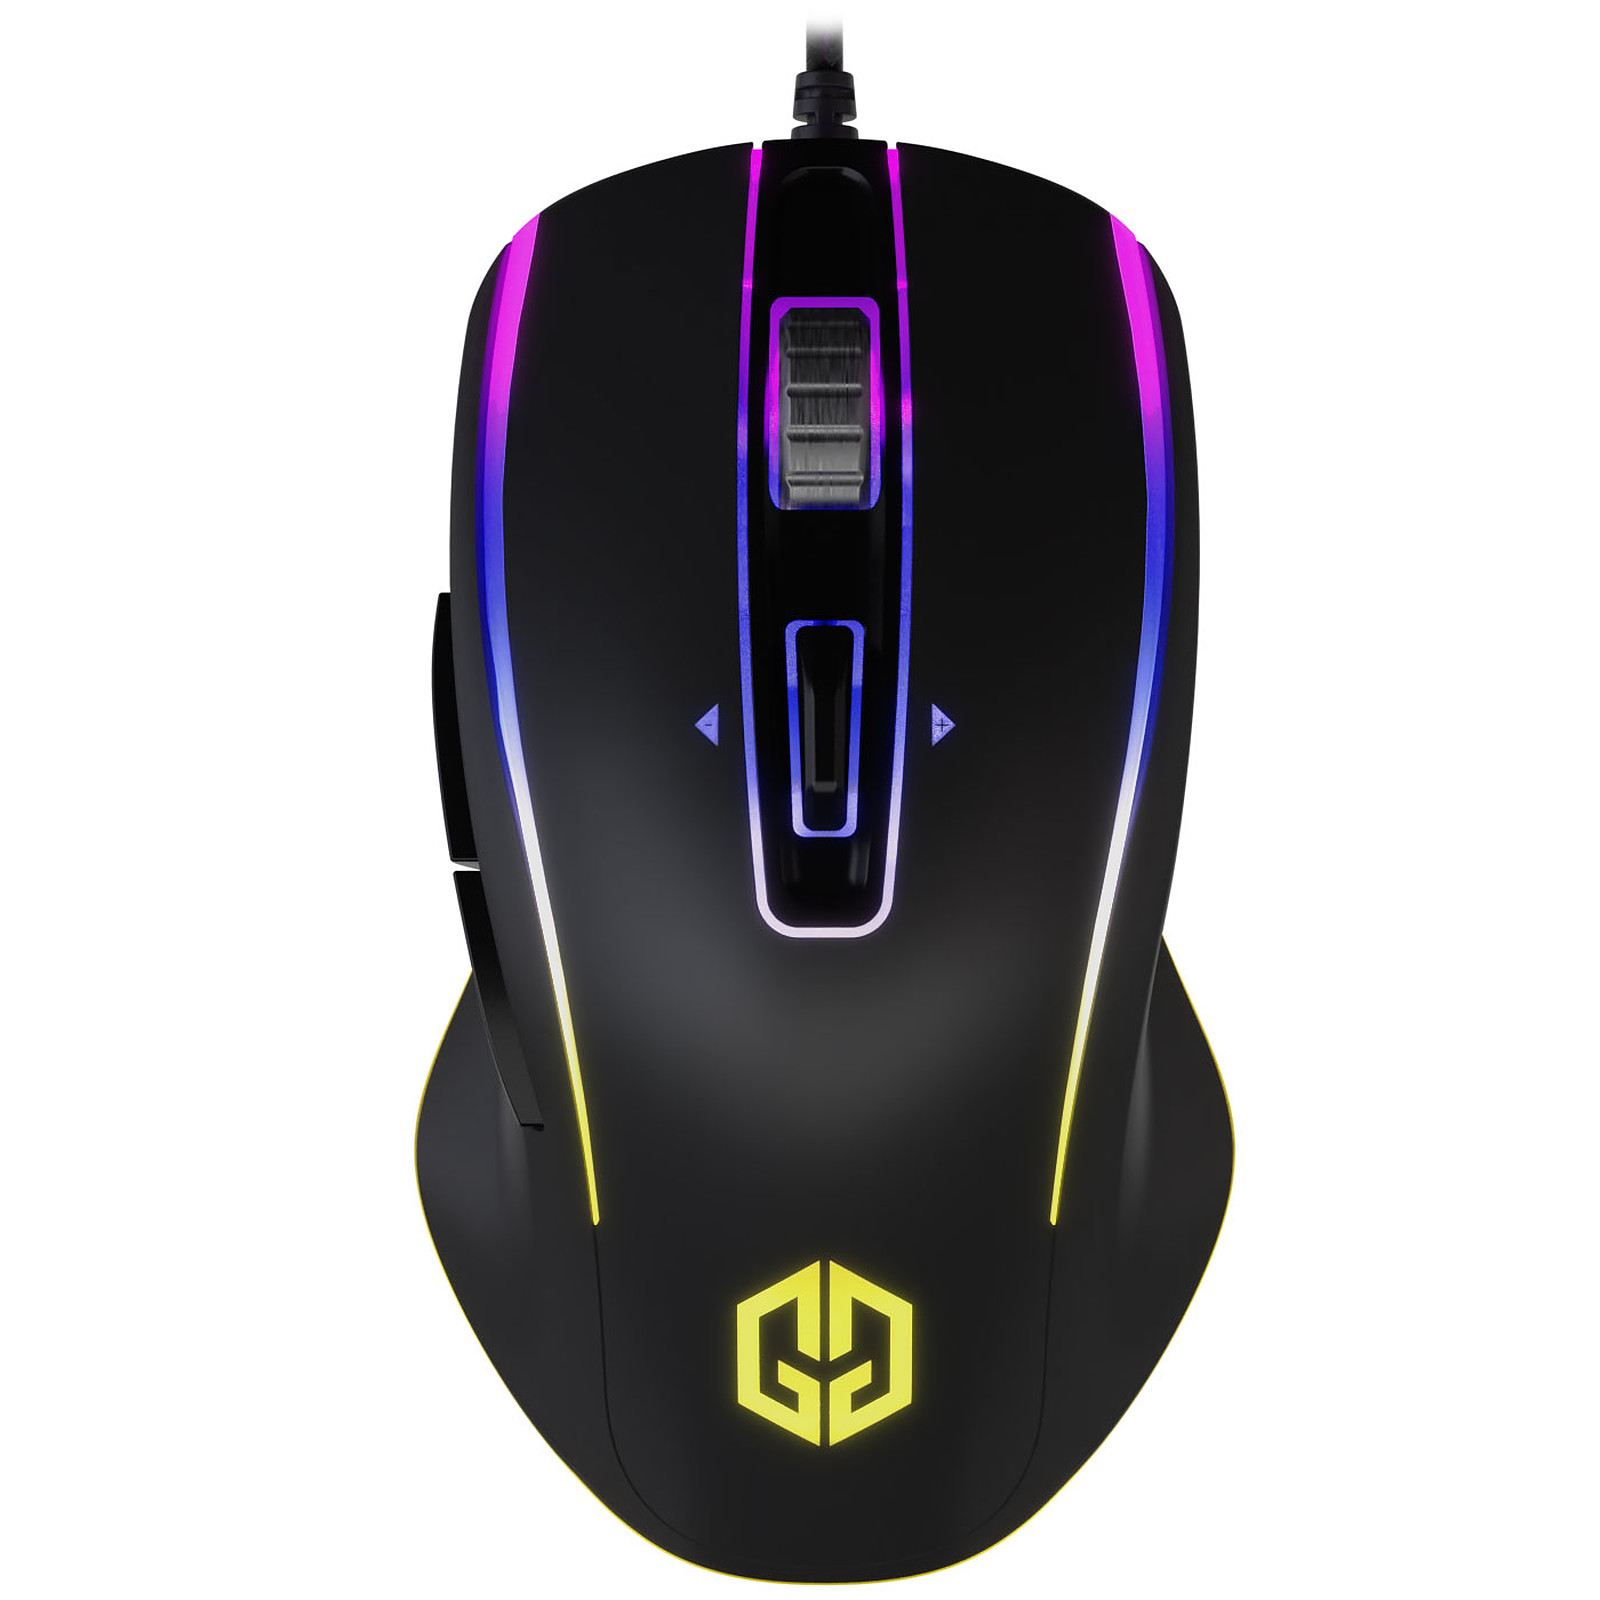 Designed by GG Dragon Slayer - Souris PC Designed by GG